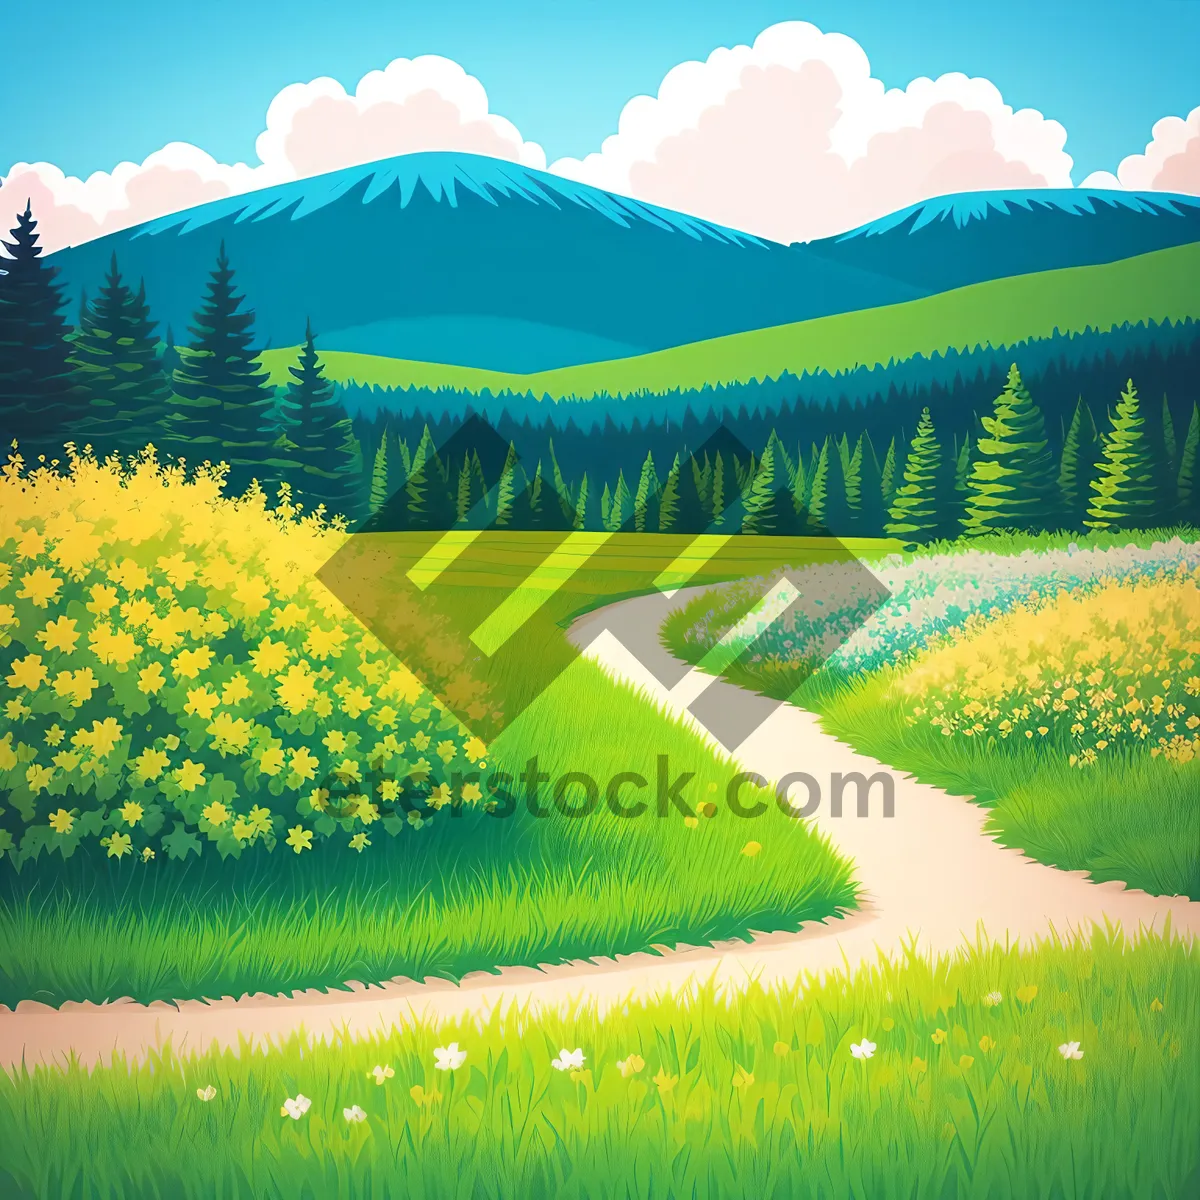 Picture of Rural Highland Farming Landscape with Beautiful Mountain Scenery